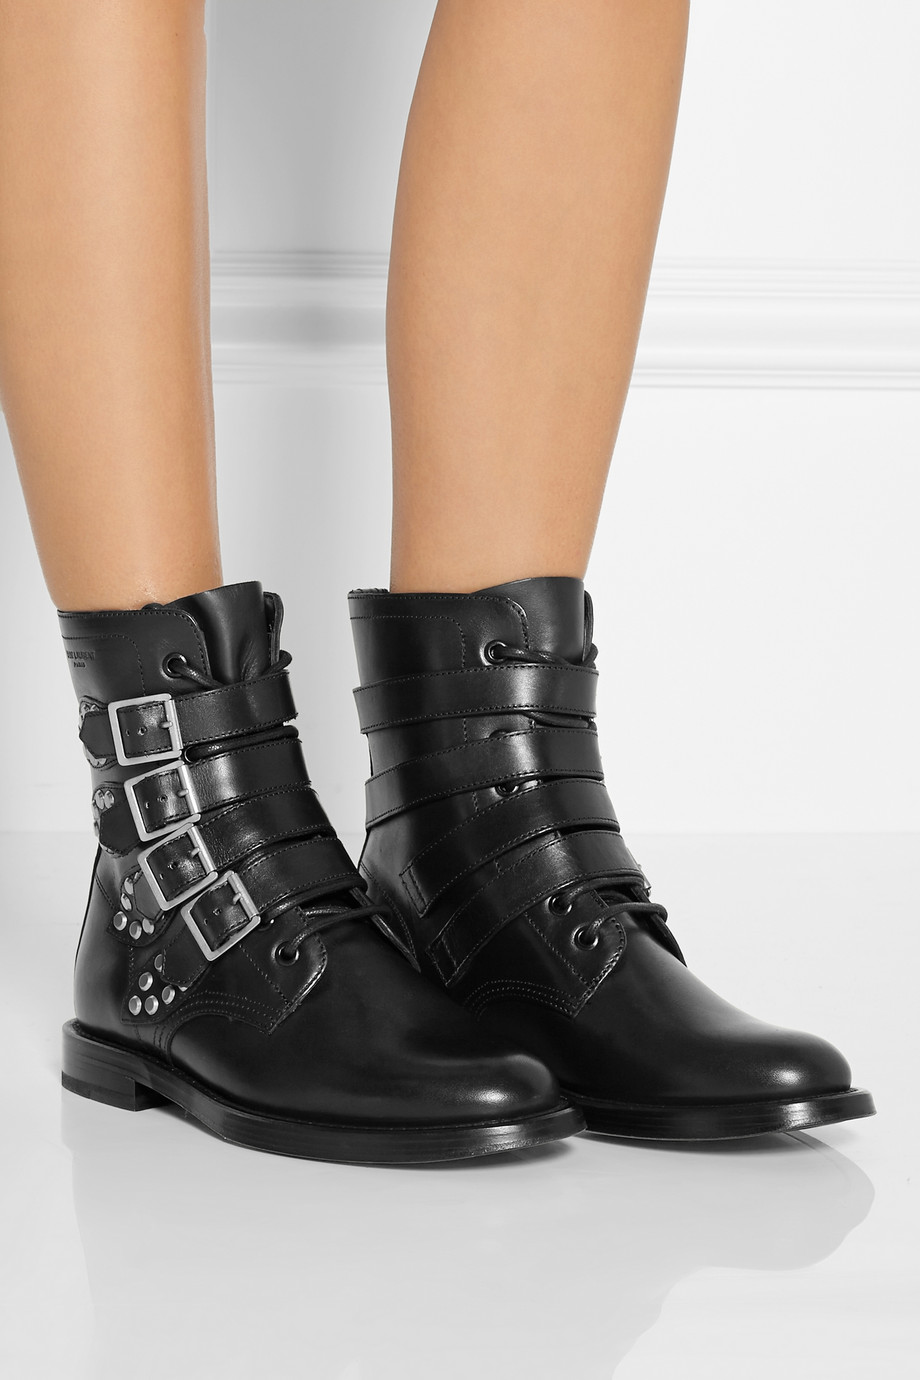 Saint Laurent Signature Rangers Studded Leather Ankle Boots in Black - Lyst